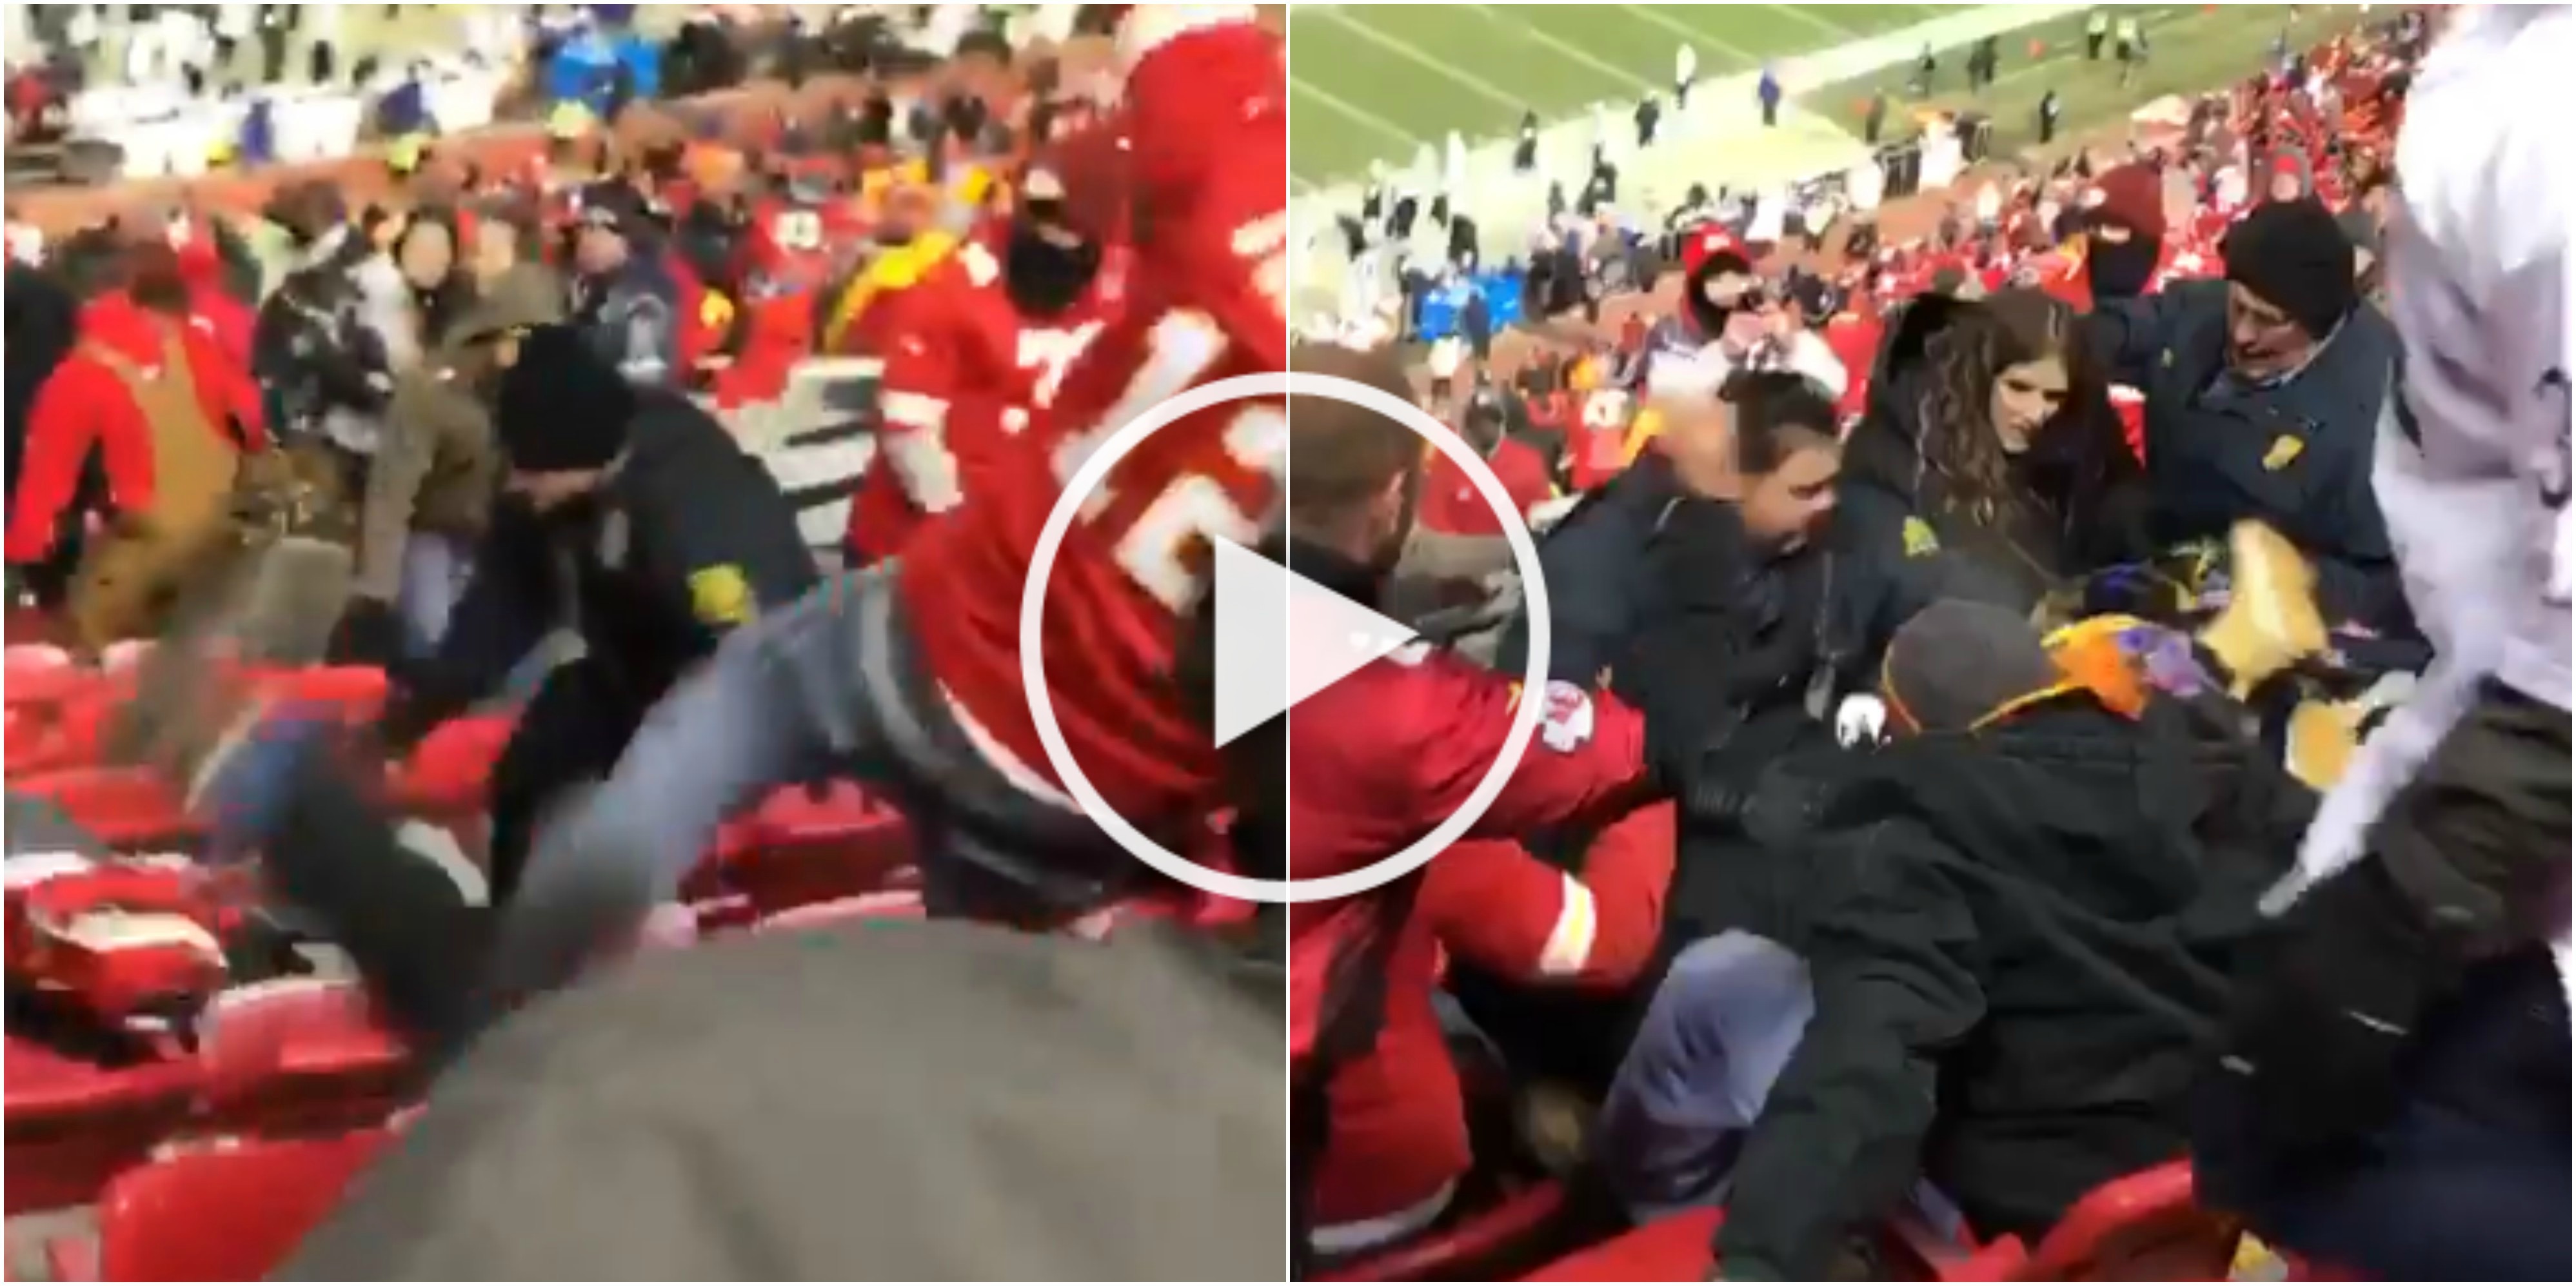 Chiefs & Raiders Fans Get Into a Massive Brawl in The Stands; Multiple